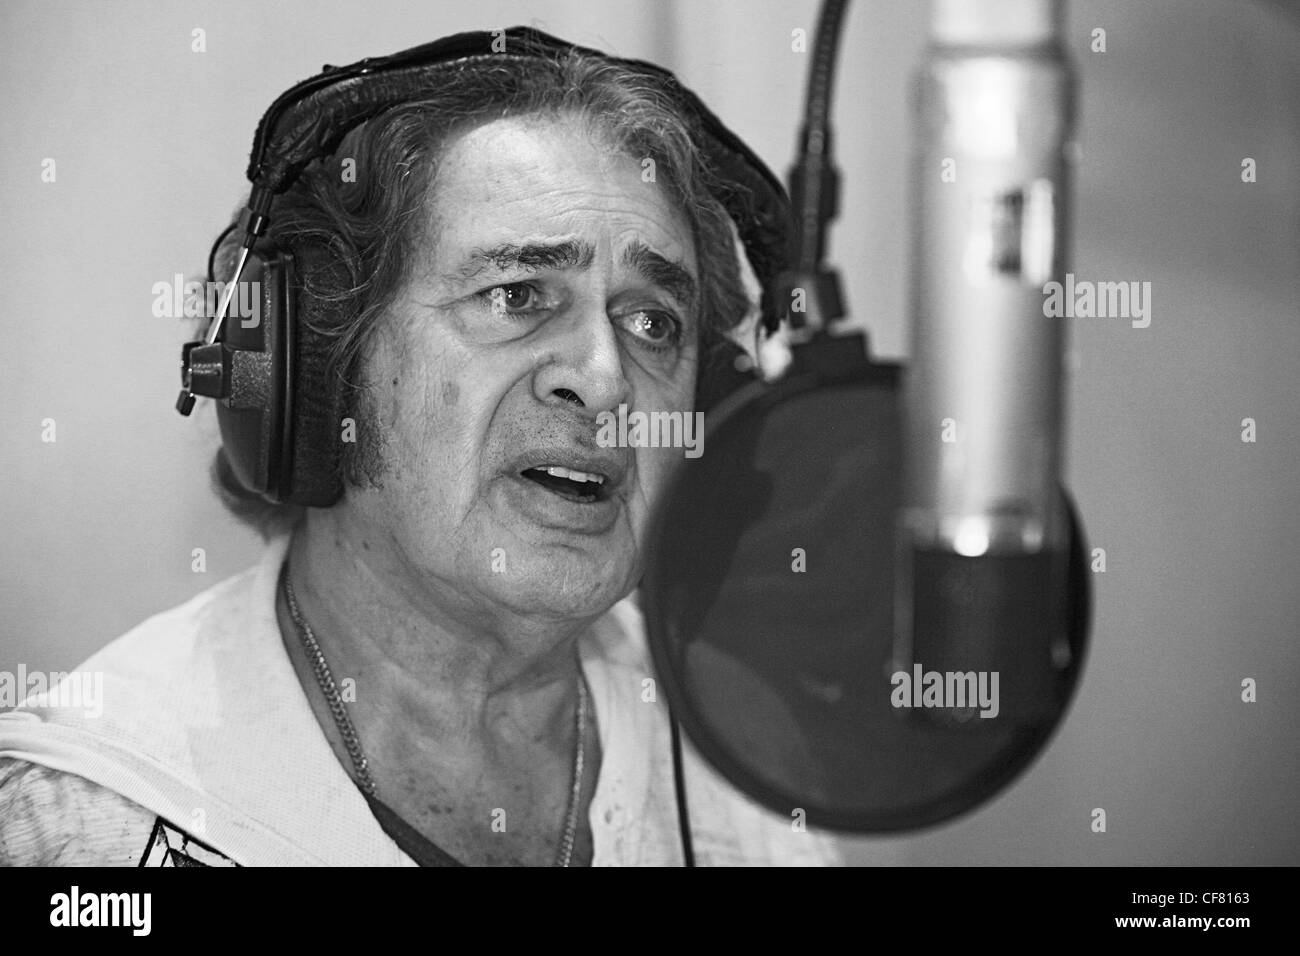 Engelbert Humperdinck UKs Eurovision entery singing in a recording studio with headphones on and singing into a microphone Stock Photo